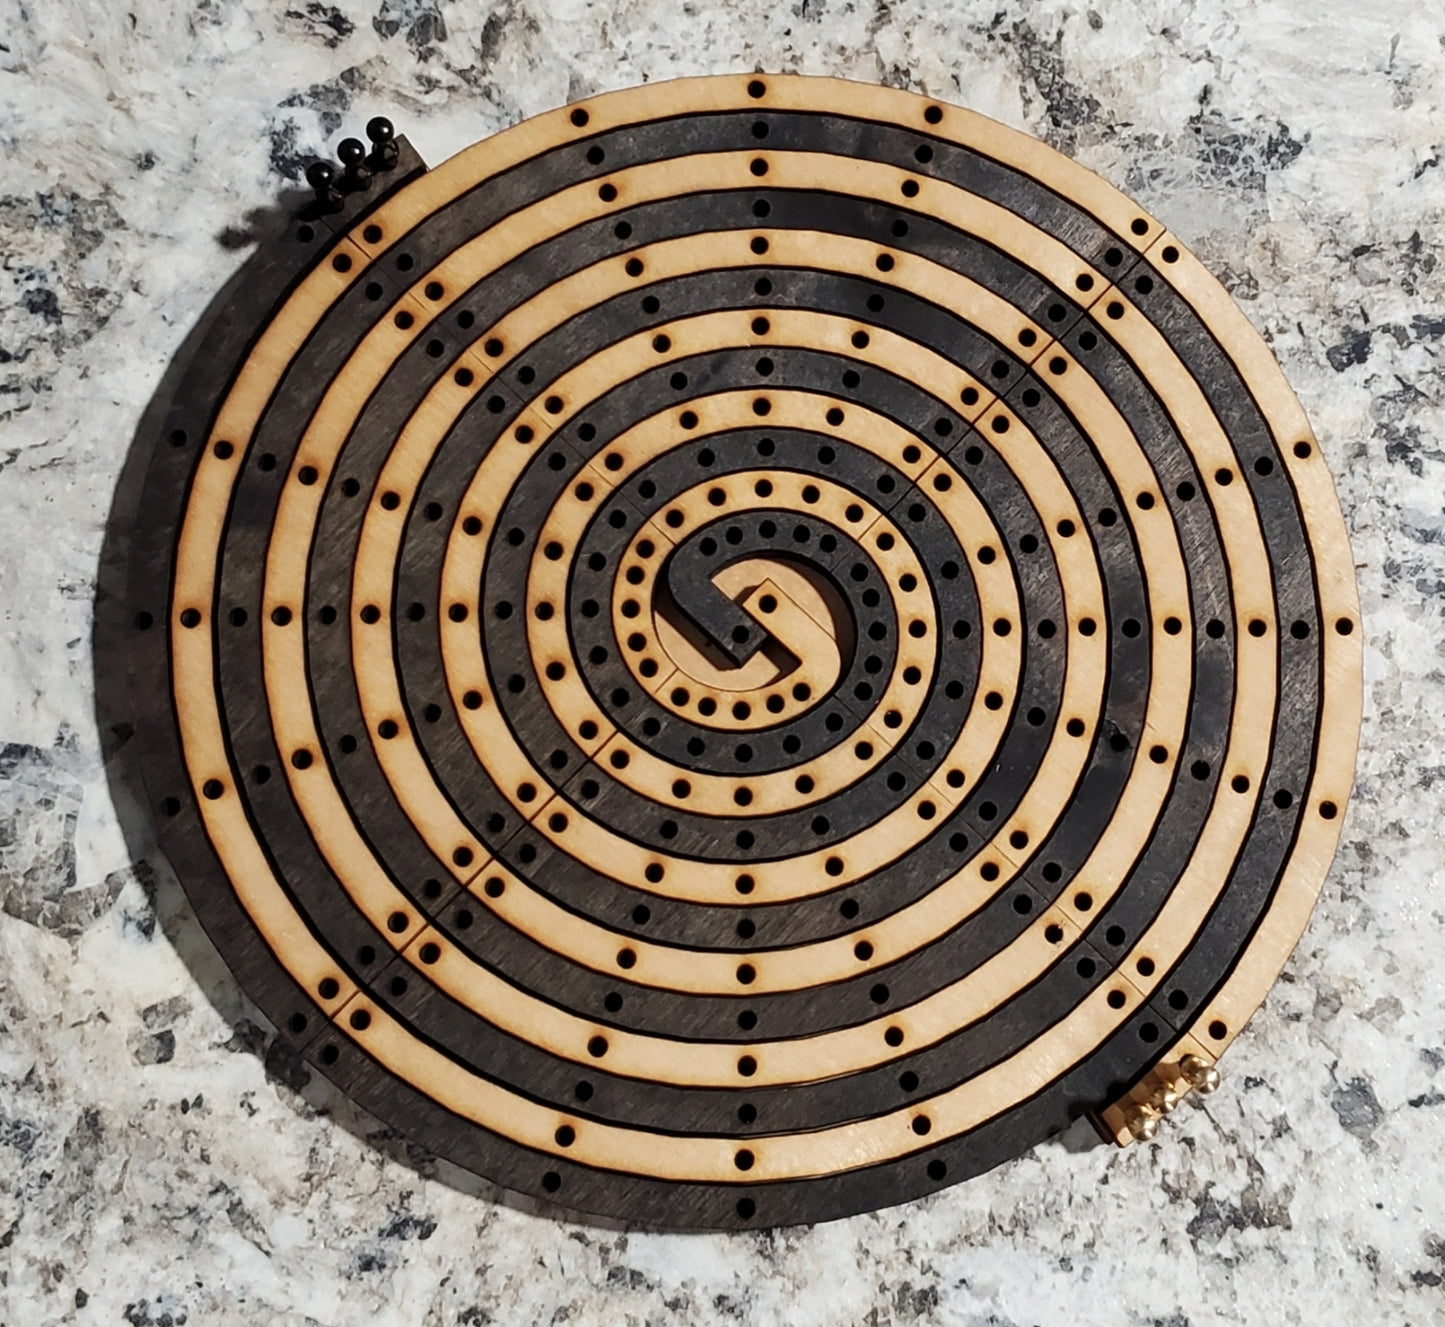 Twisted Spiral Cribbage Board - 2 Players - Small